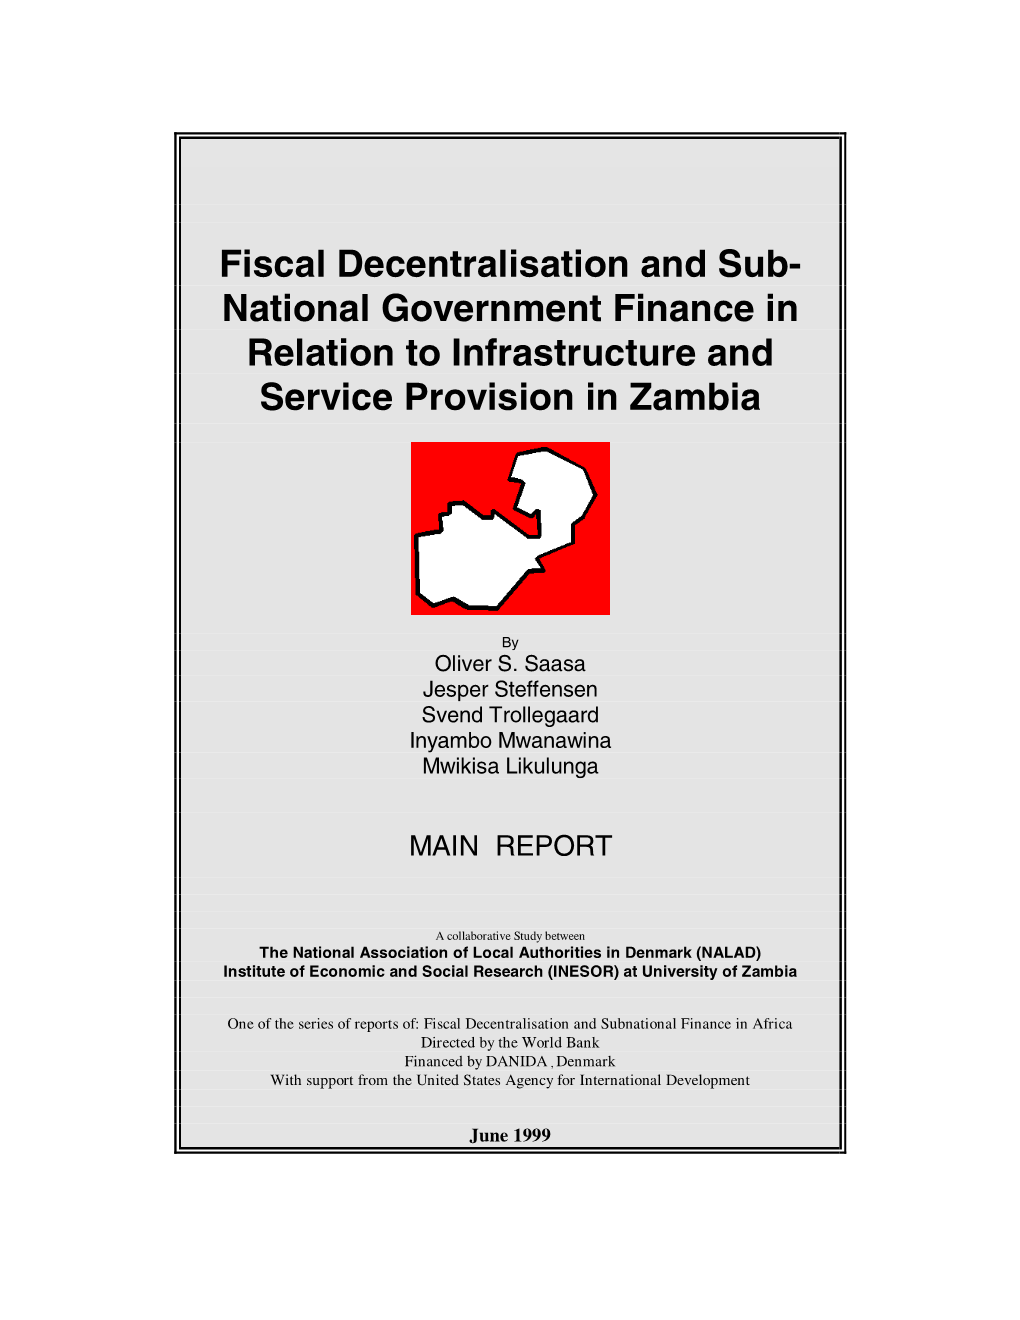 Fiscal Decentralisation and Sub-National Government Finance in Relation to Infrastructure and Service Provision in Zambia/NALAD-INESOR June 1999 ______